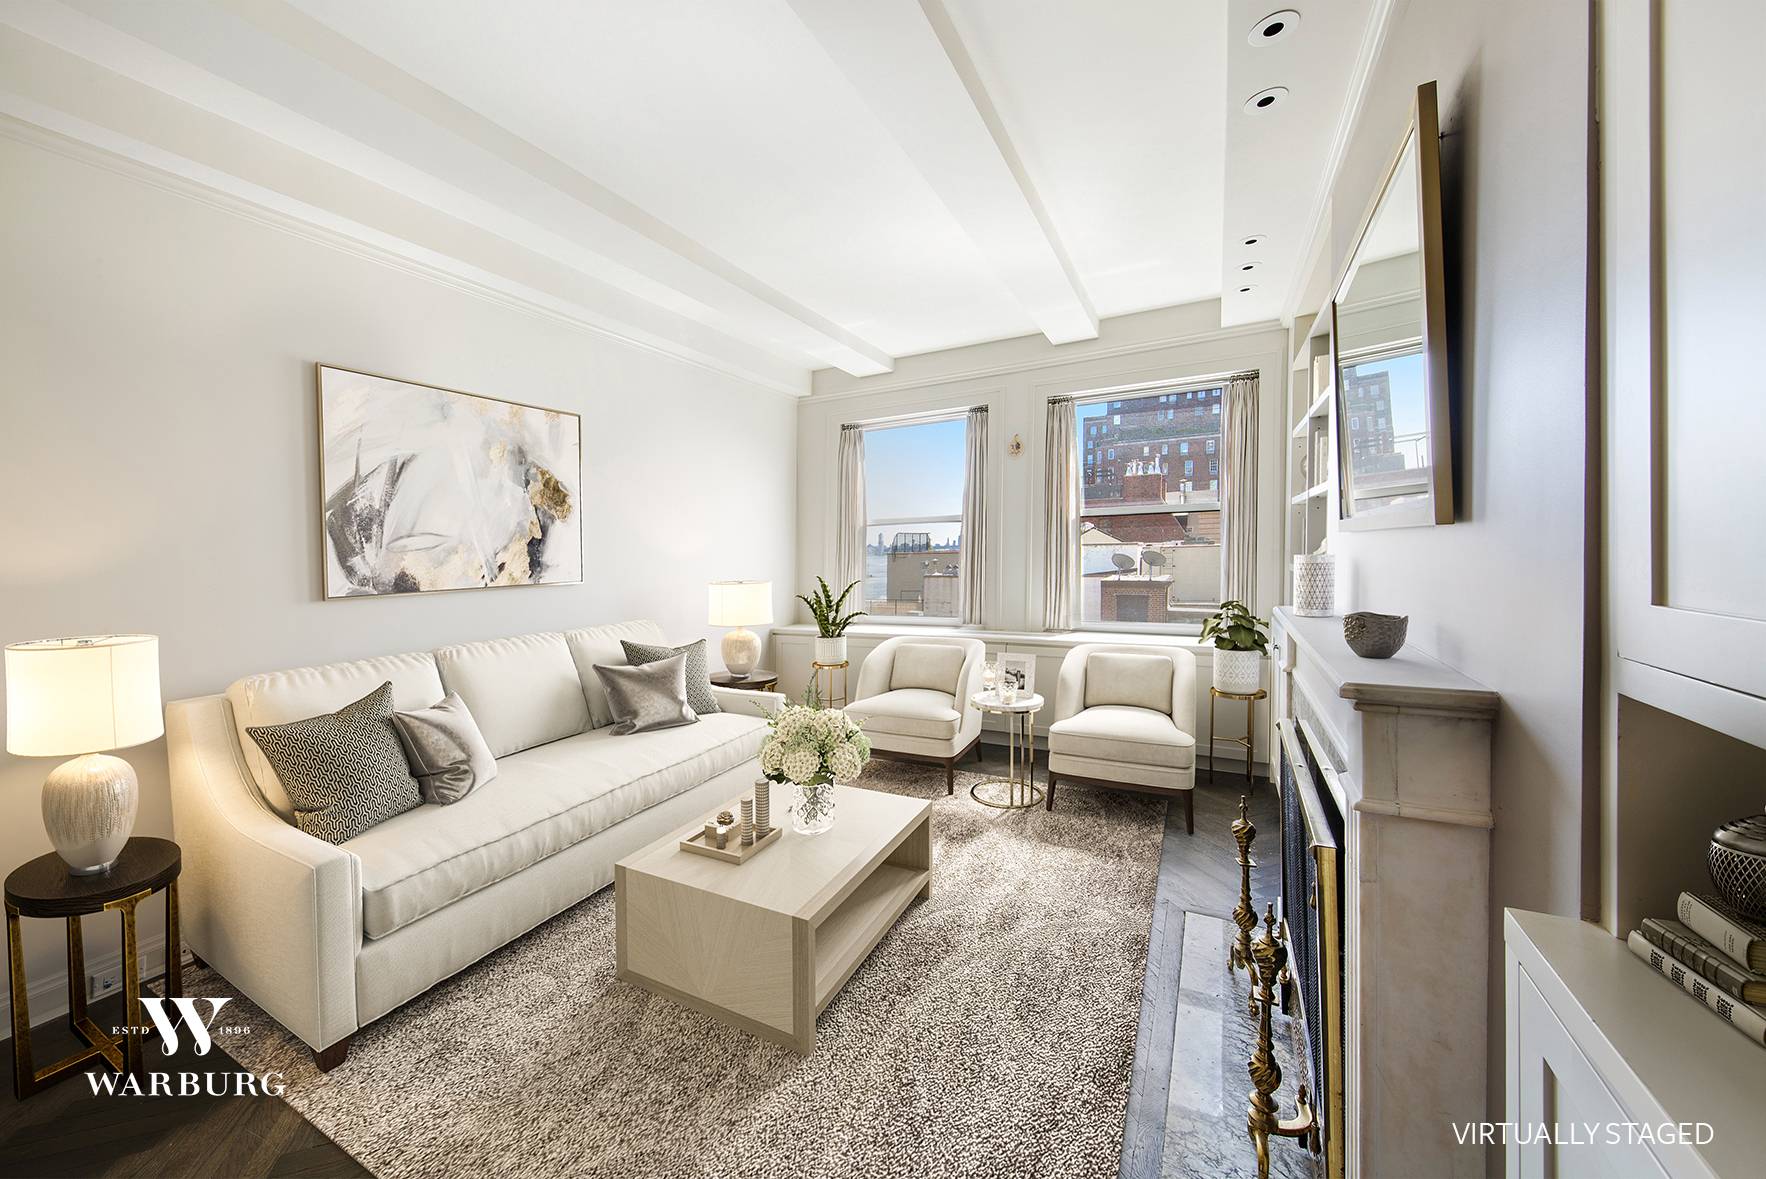 No detail was overlooked in the elegant, bespoke renovation for this sun splashed 1 bedroom, 1 bathroom home, looking south over tony Beekman Place.